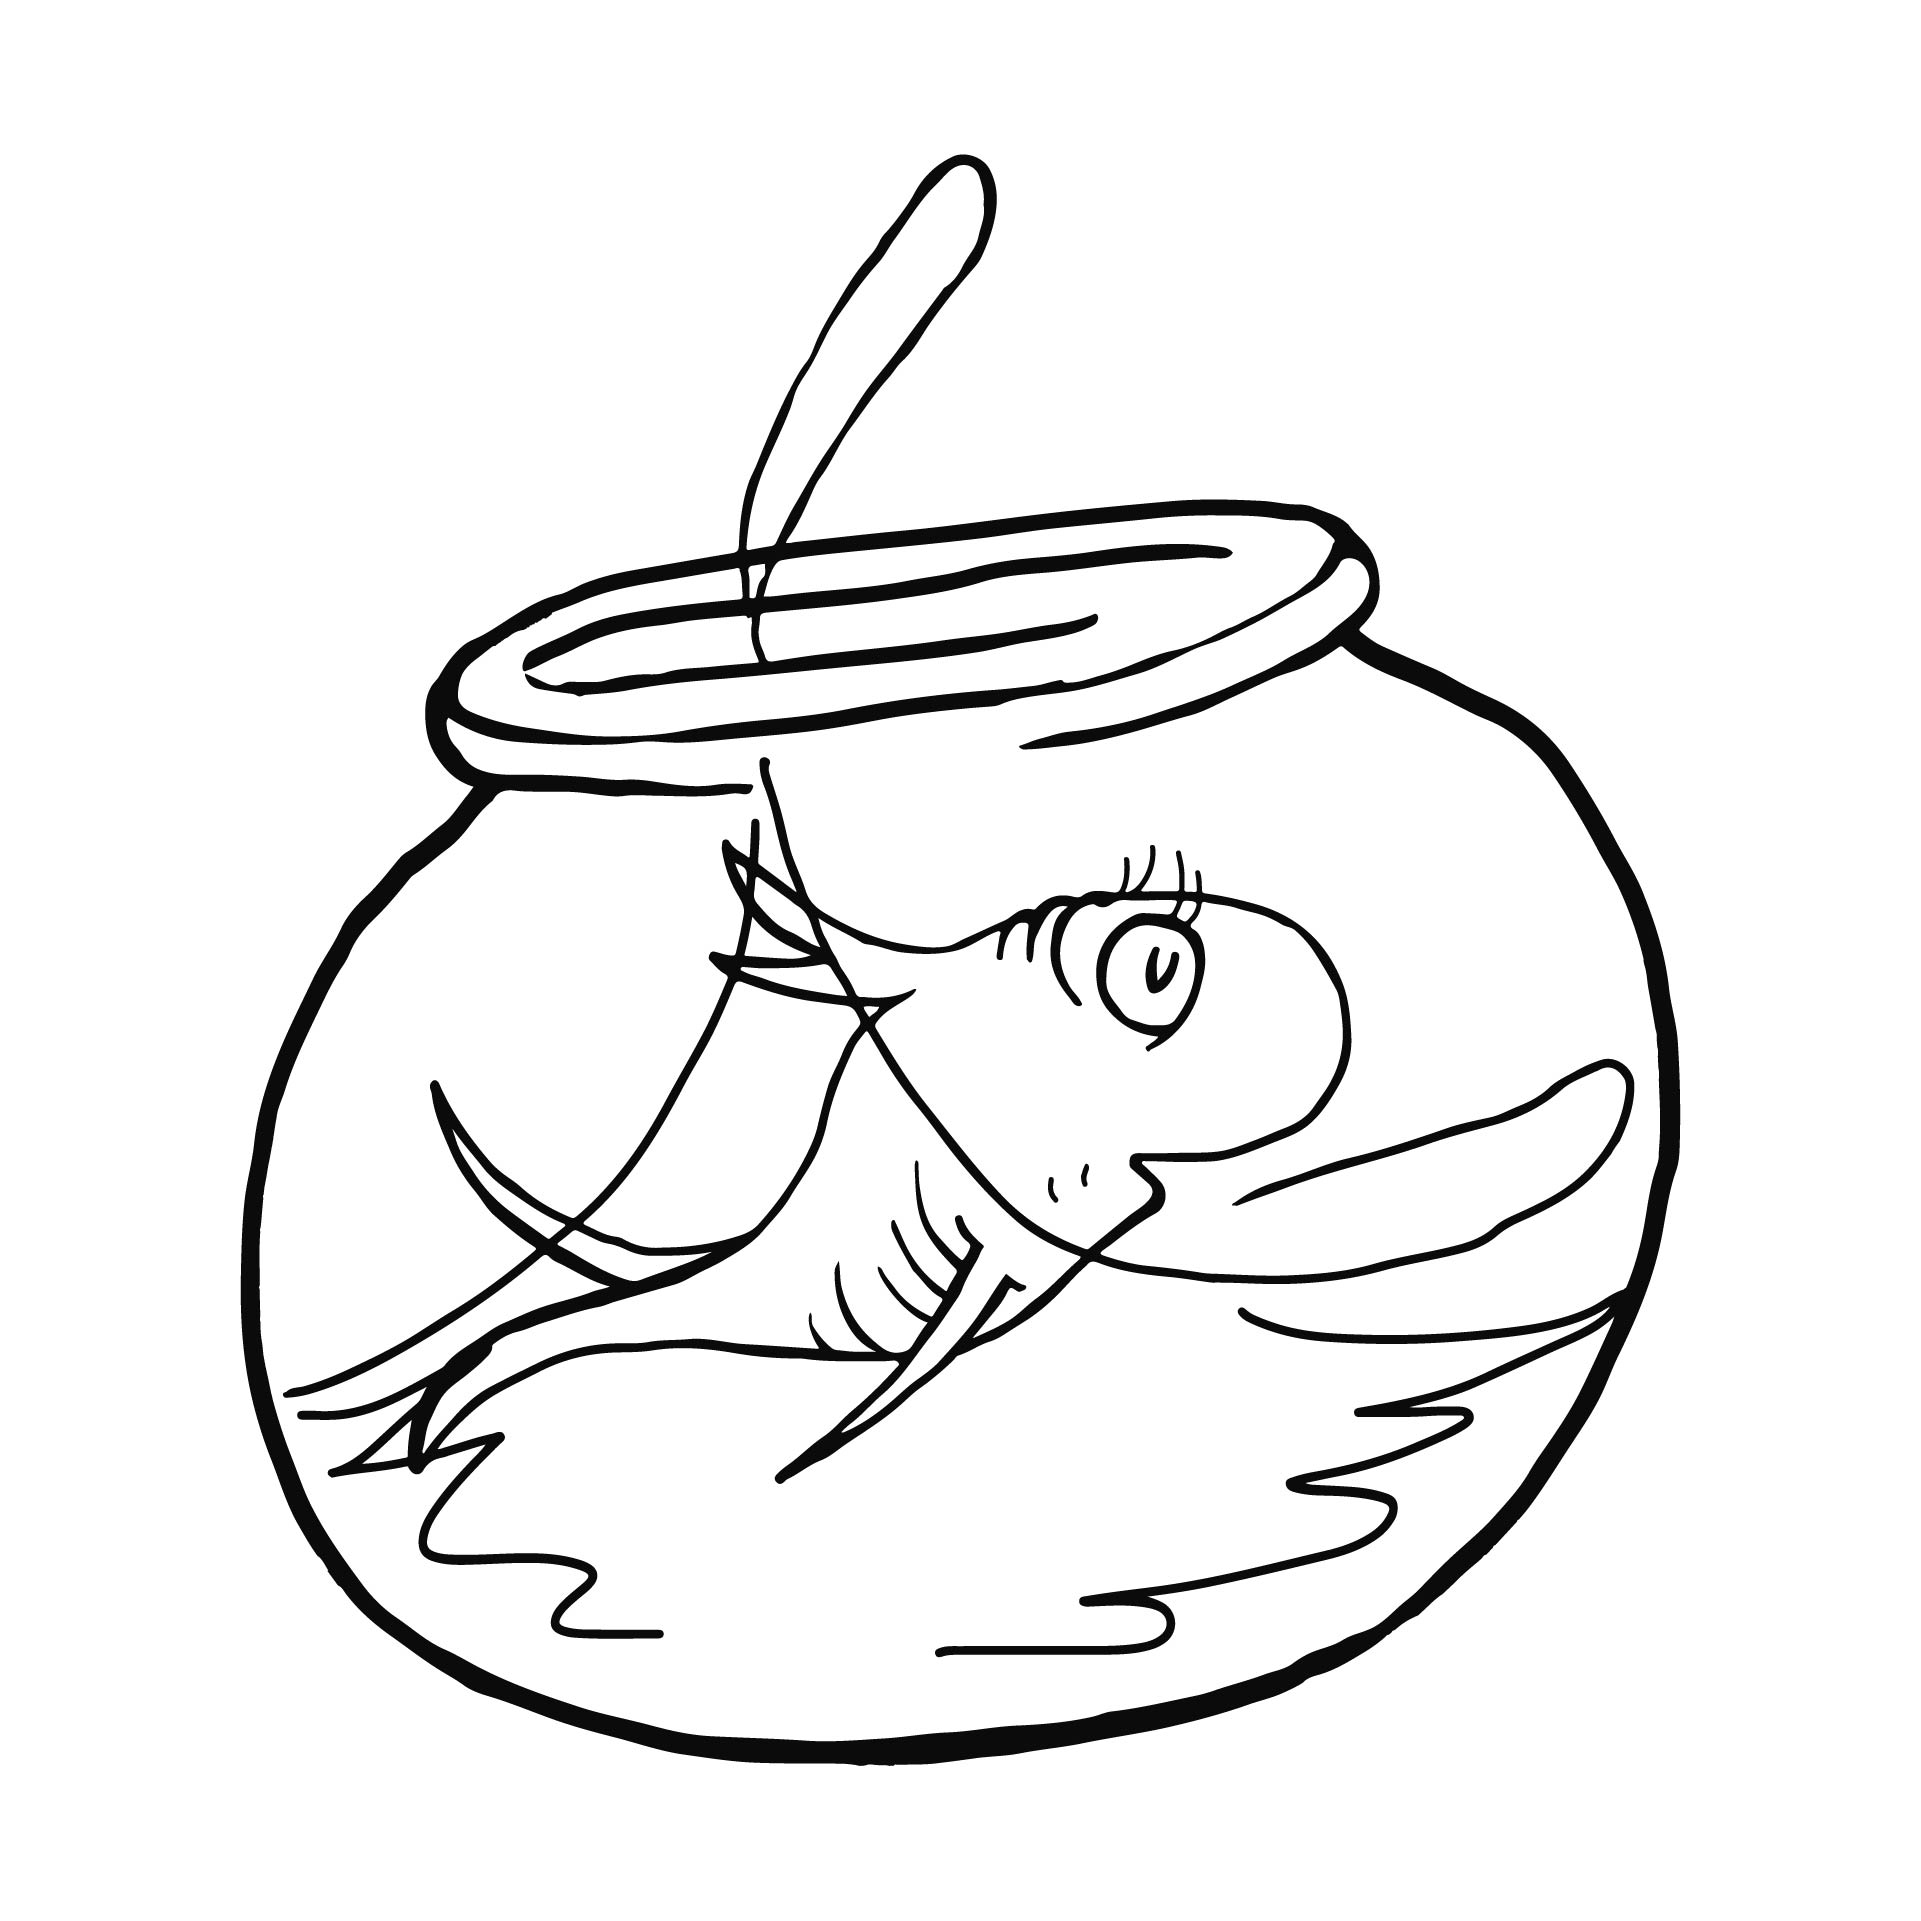 8 Best Images of Printable Dr. Seuss Fish Bowl Dr. Seuss One Fish Two